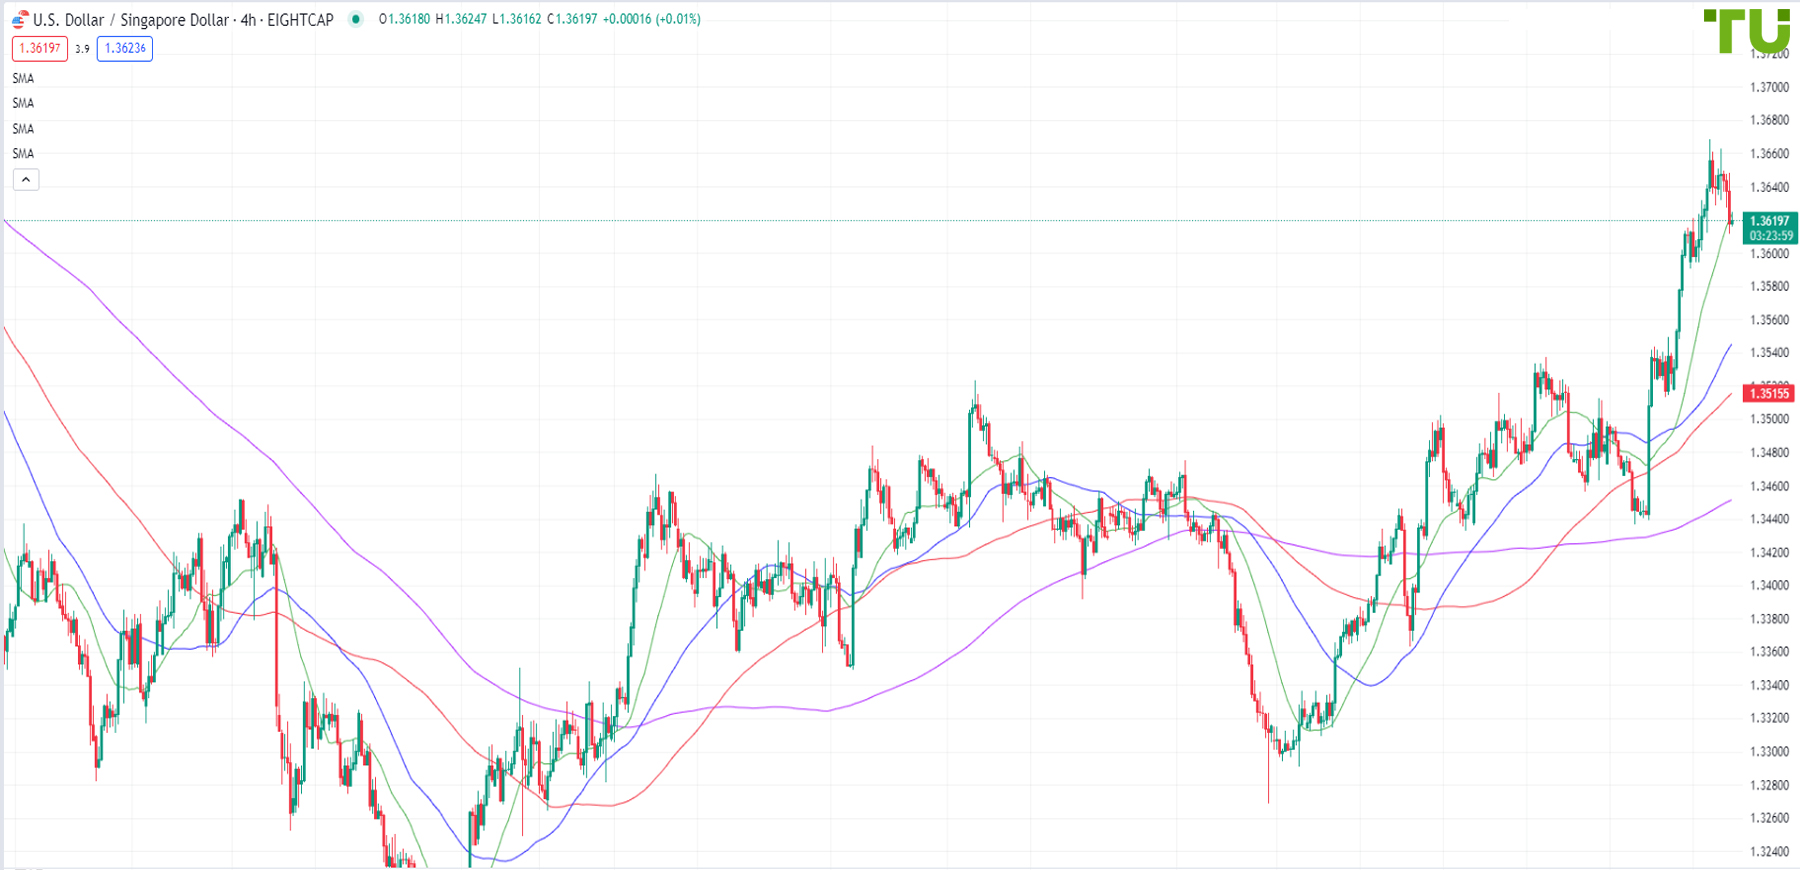 USD/SGD is moving away from the resistance level of 1.3650